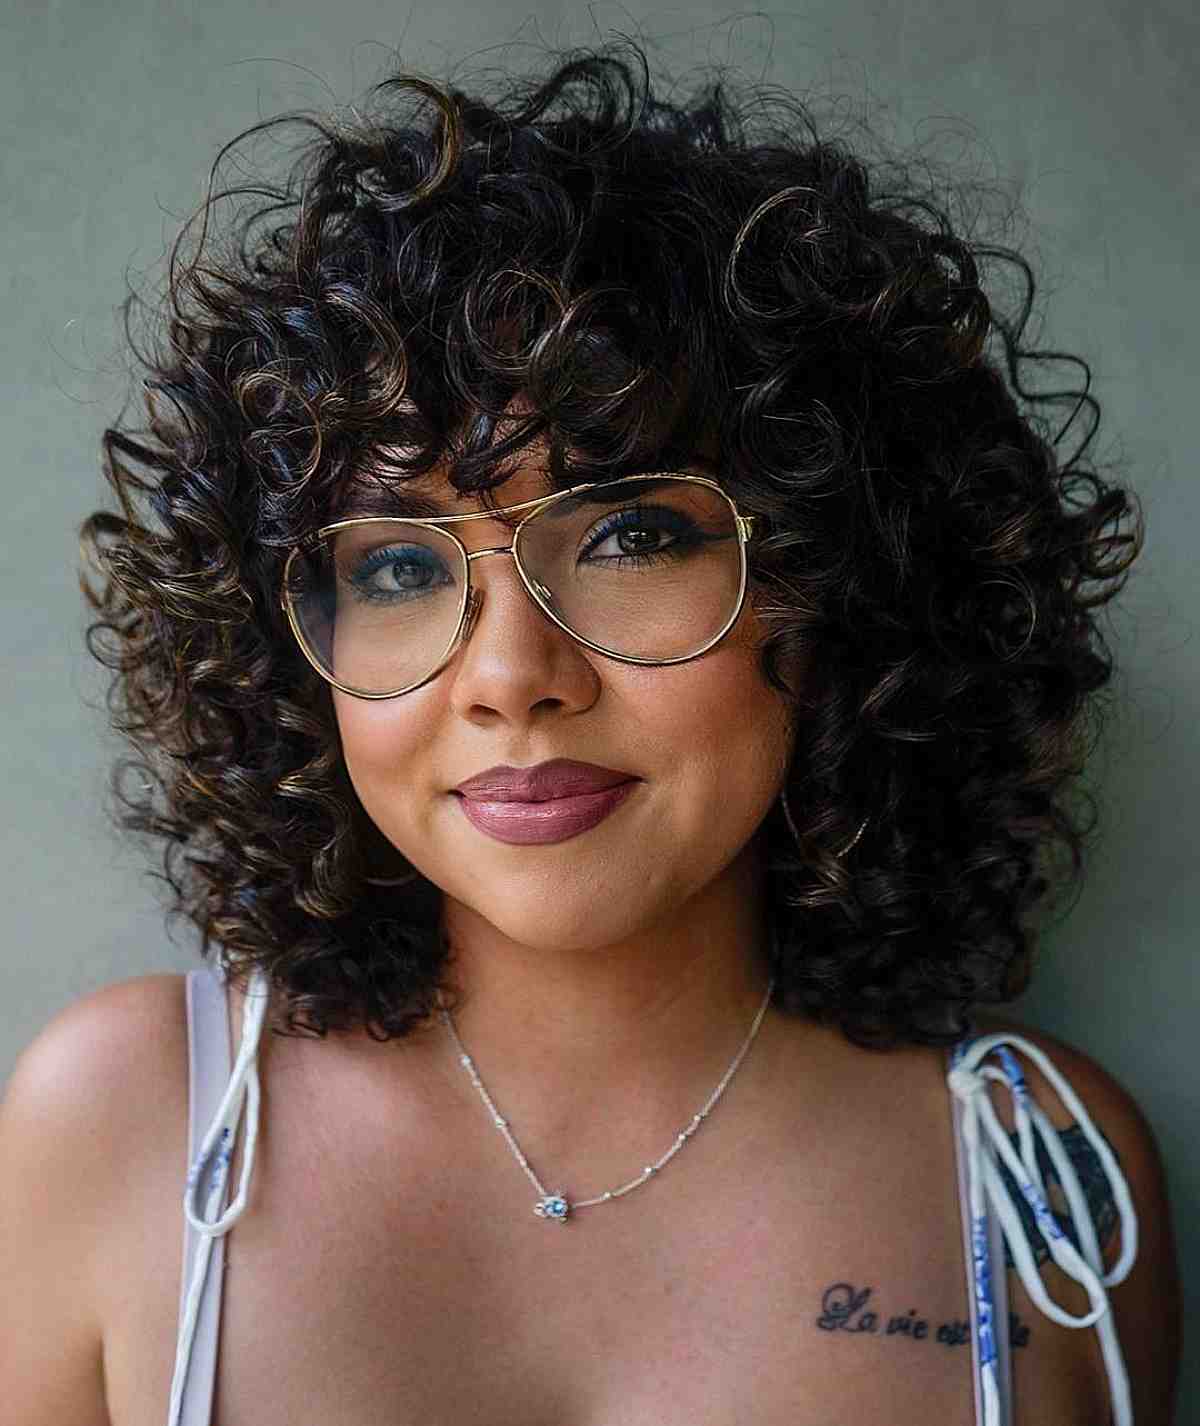 Fresh Bobbed Curls and Bangs with Glasses